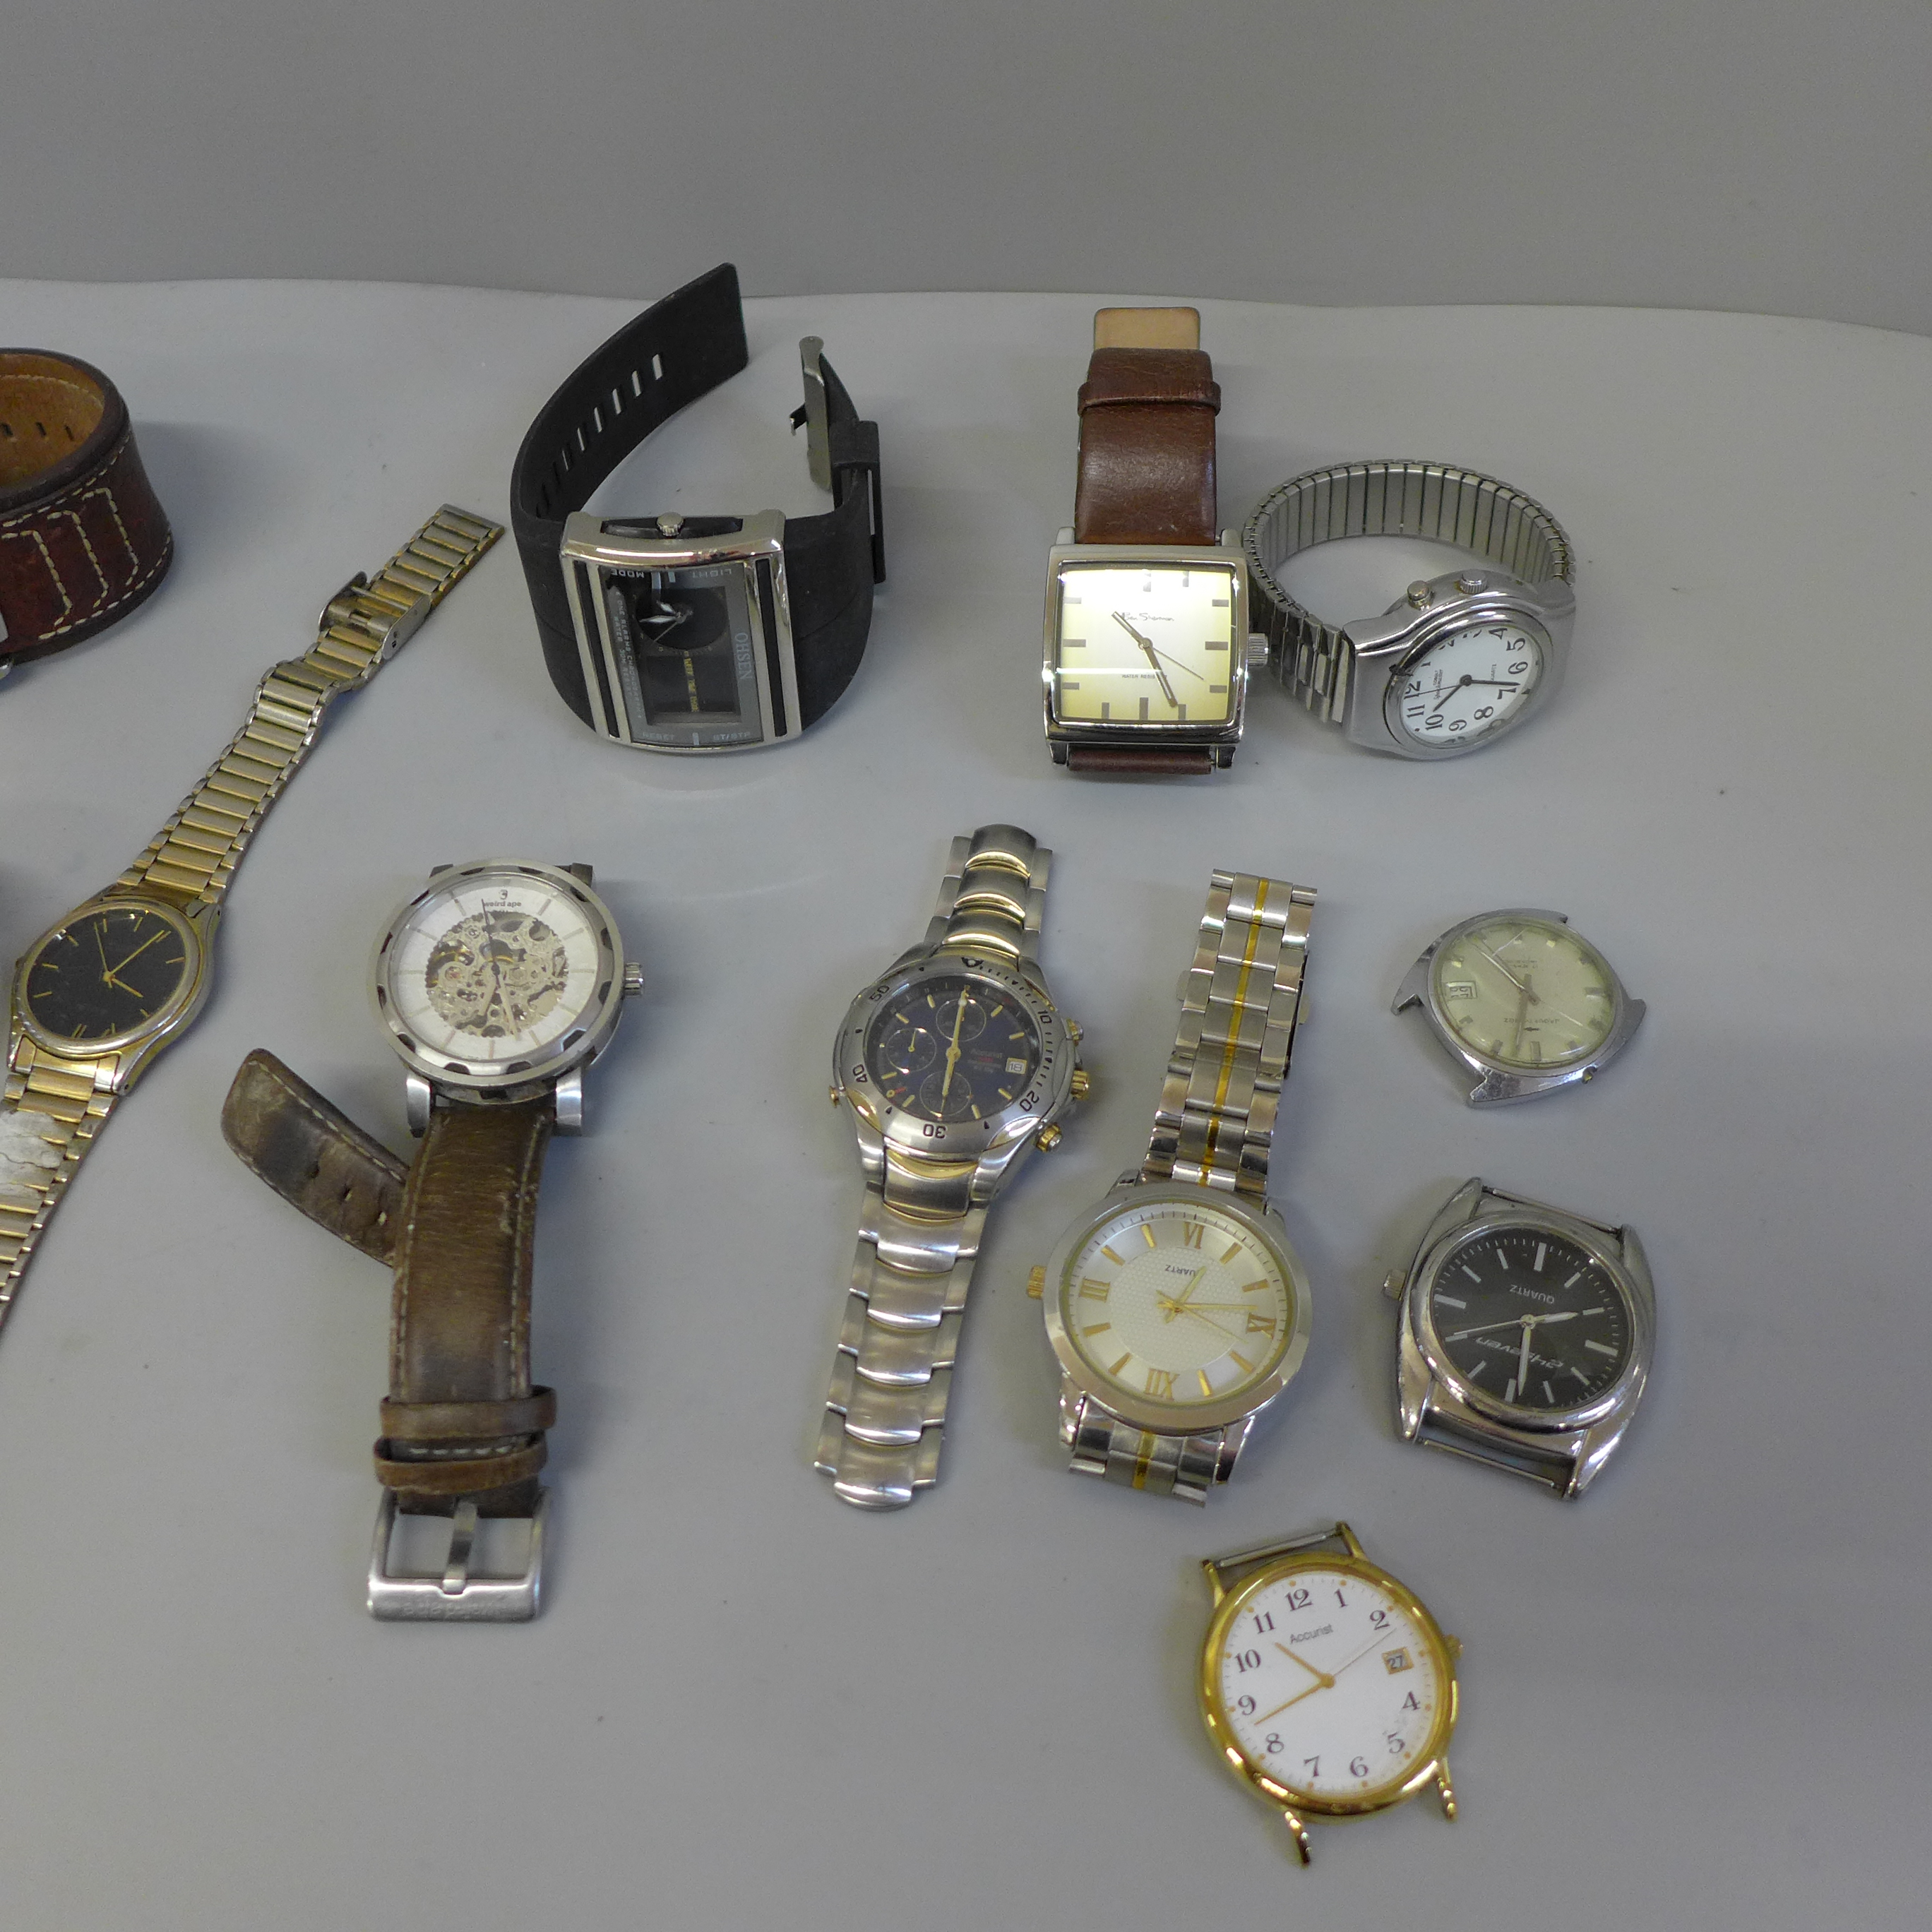 A collection of gentlemen's wristwatches including Times and Accurist - Image 2 of 3